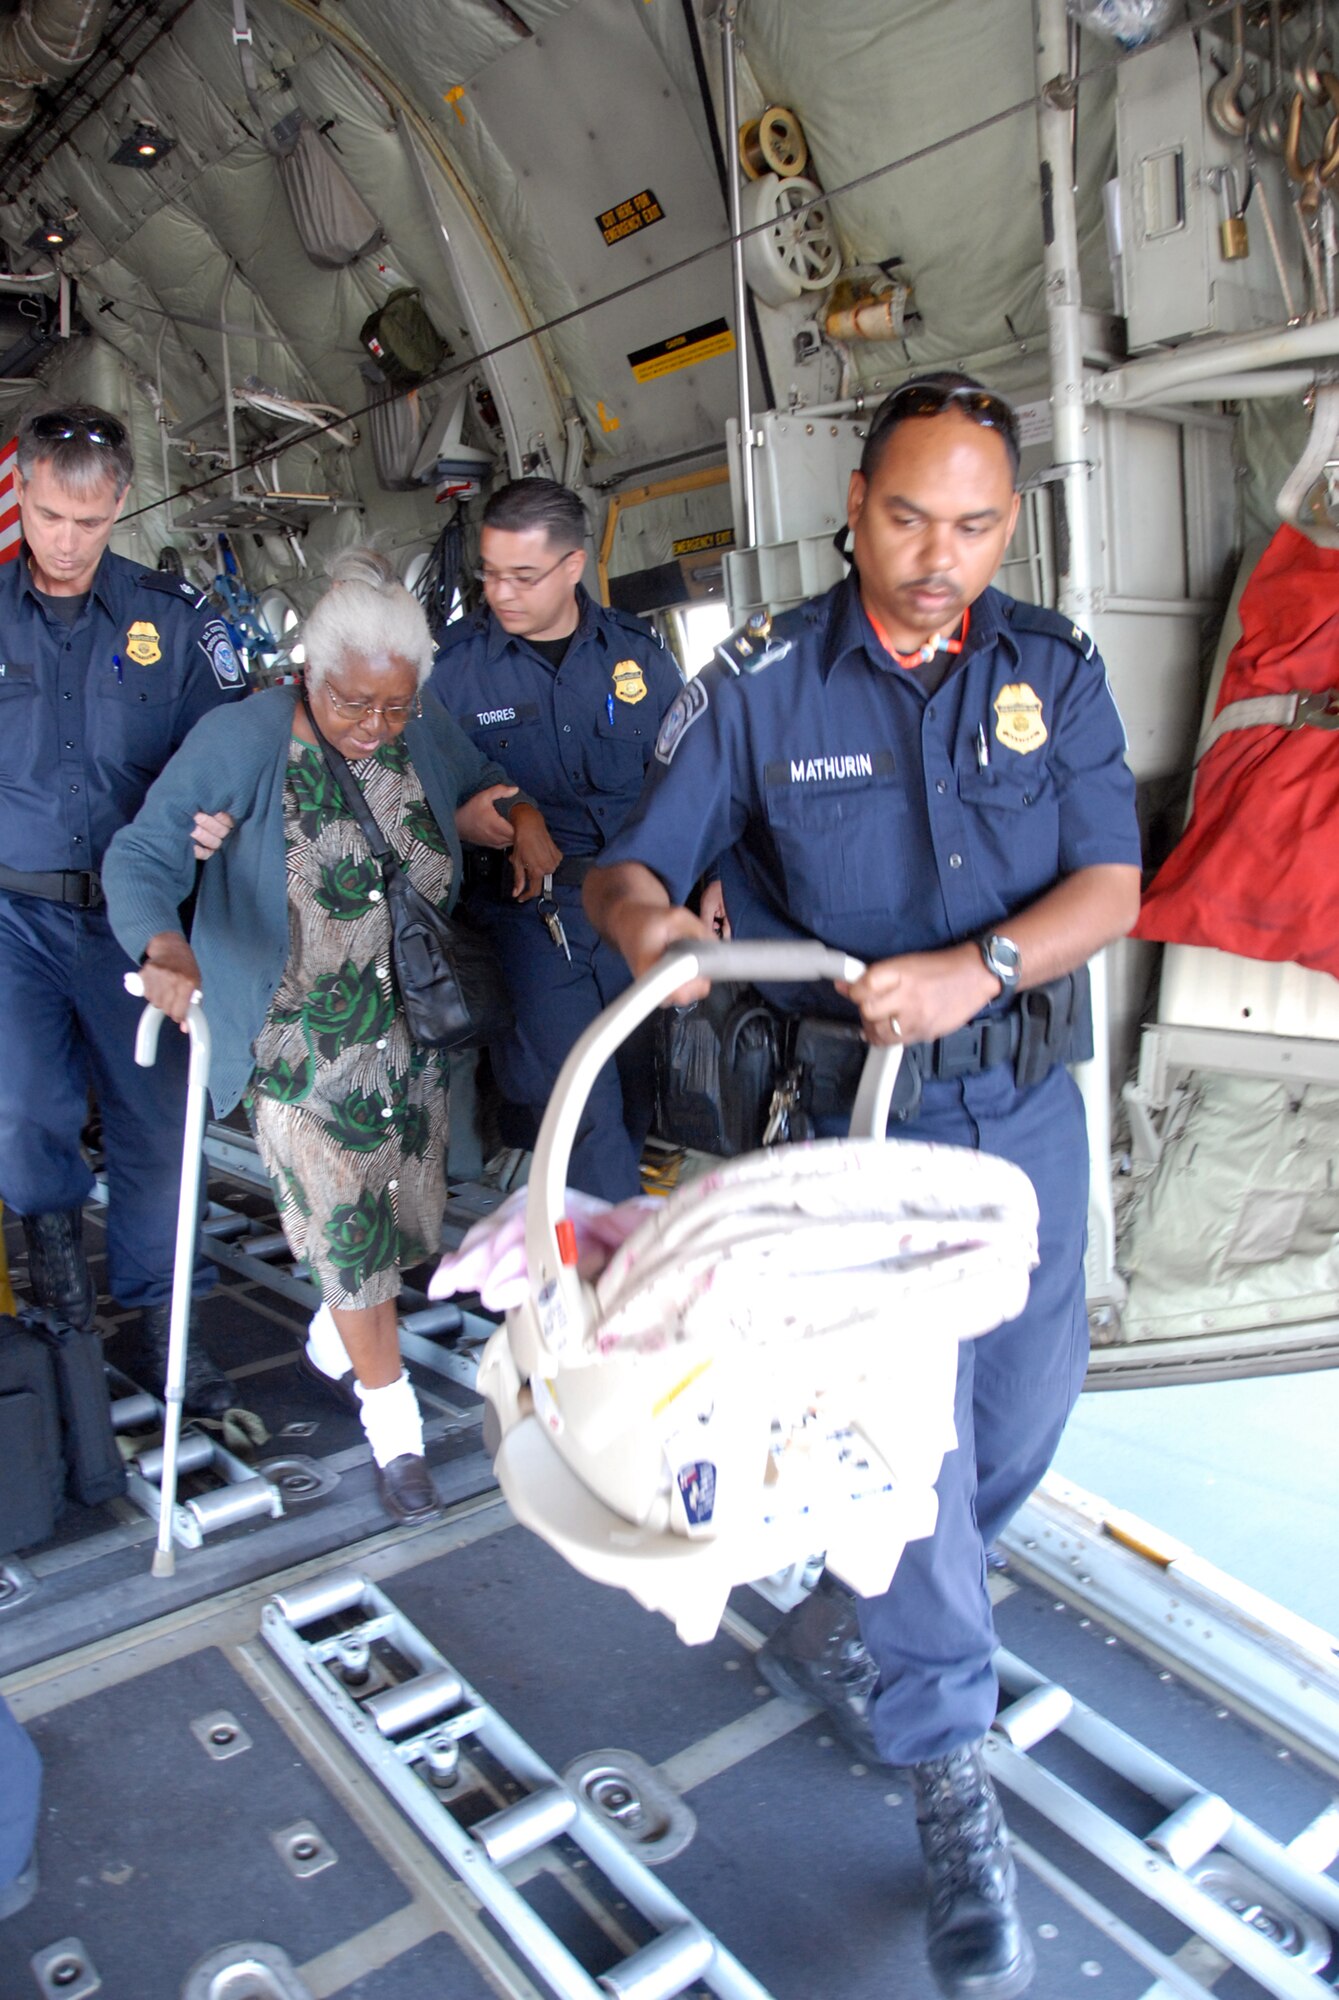 HOMESTEAD AIR RESERVE BASE, Fla. - U.S. Customs and Border Protection agents help and elderly Haitian lady and a baby from a C-130 aircraft assigned to the Minnesota Air National Guard. All personnel brought to Homestead ARB from Haiti must go through a Customs and Border Protection enforcement examimantion. (Air Force Photo/Master Sgt. Chance Babin)